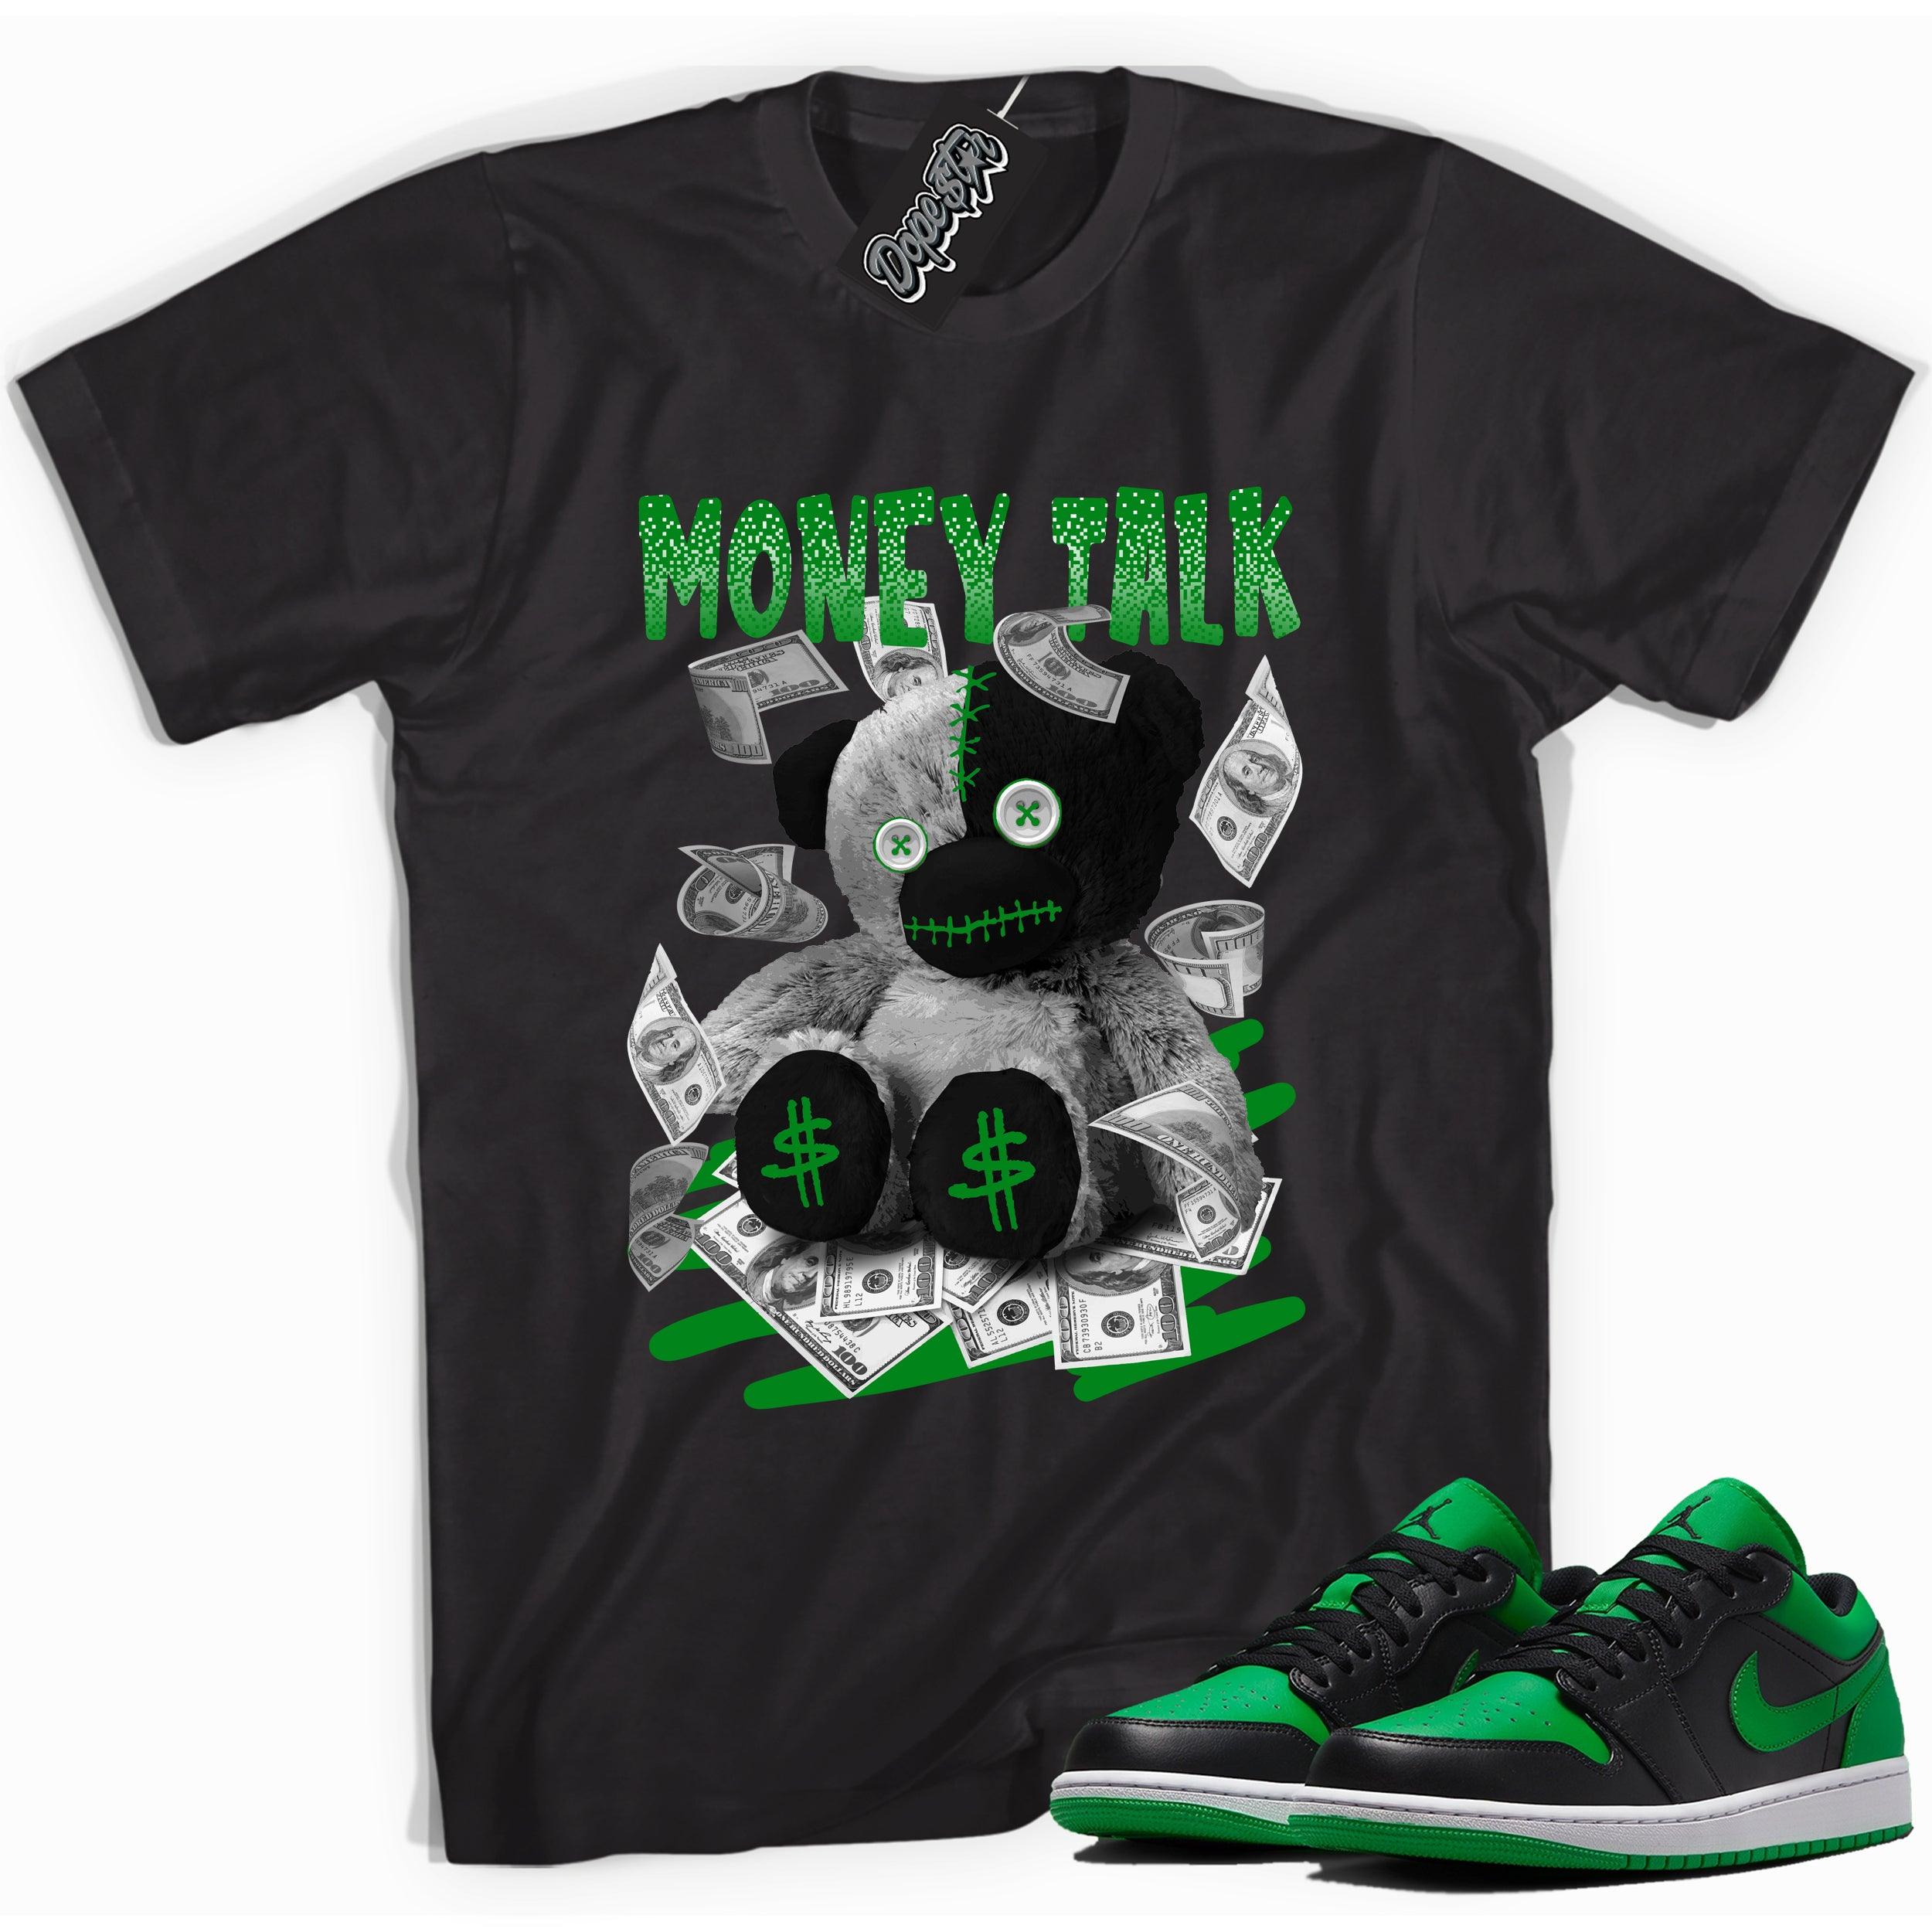 Cool black graphic tee with 'money talk bear' print, that perfectly matches Air Jordan 1 Low Lucky Green sneakers